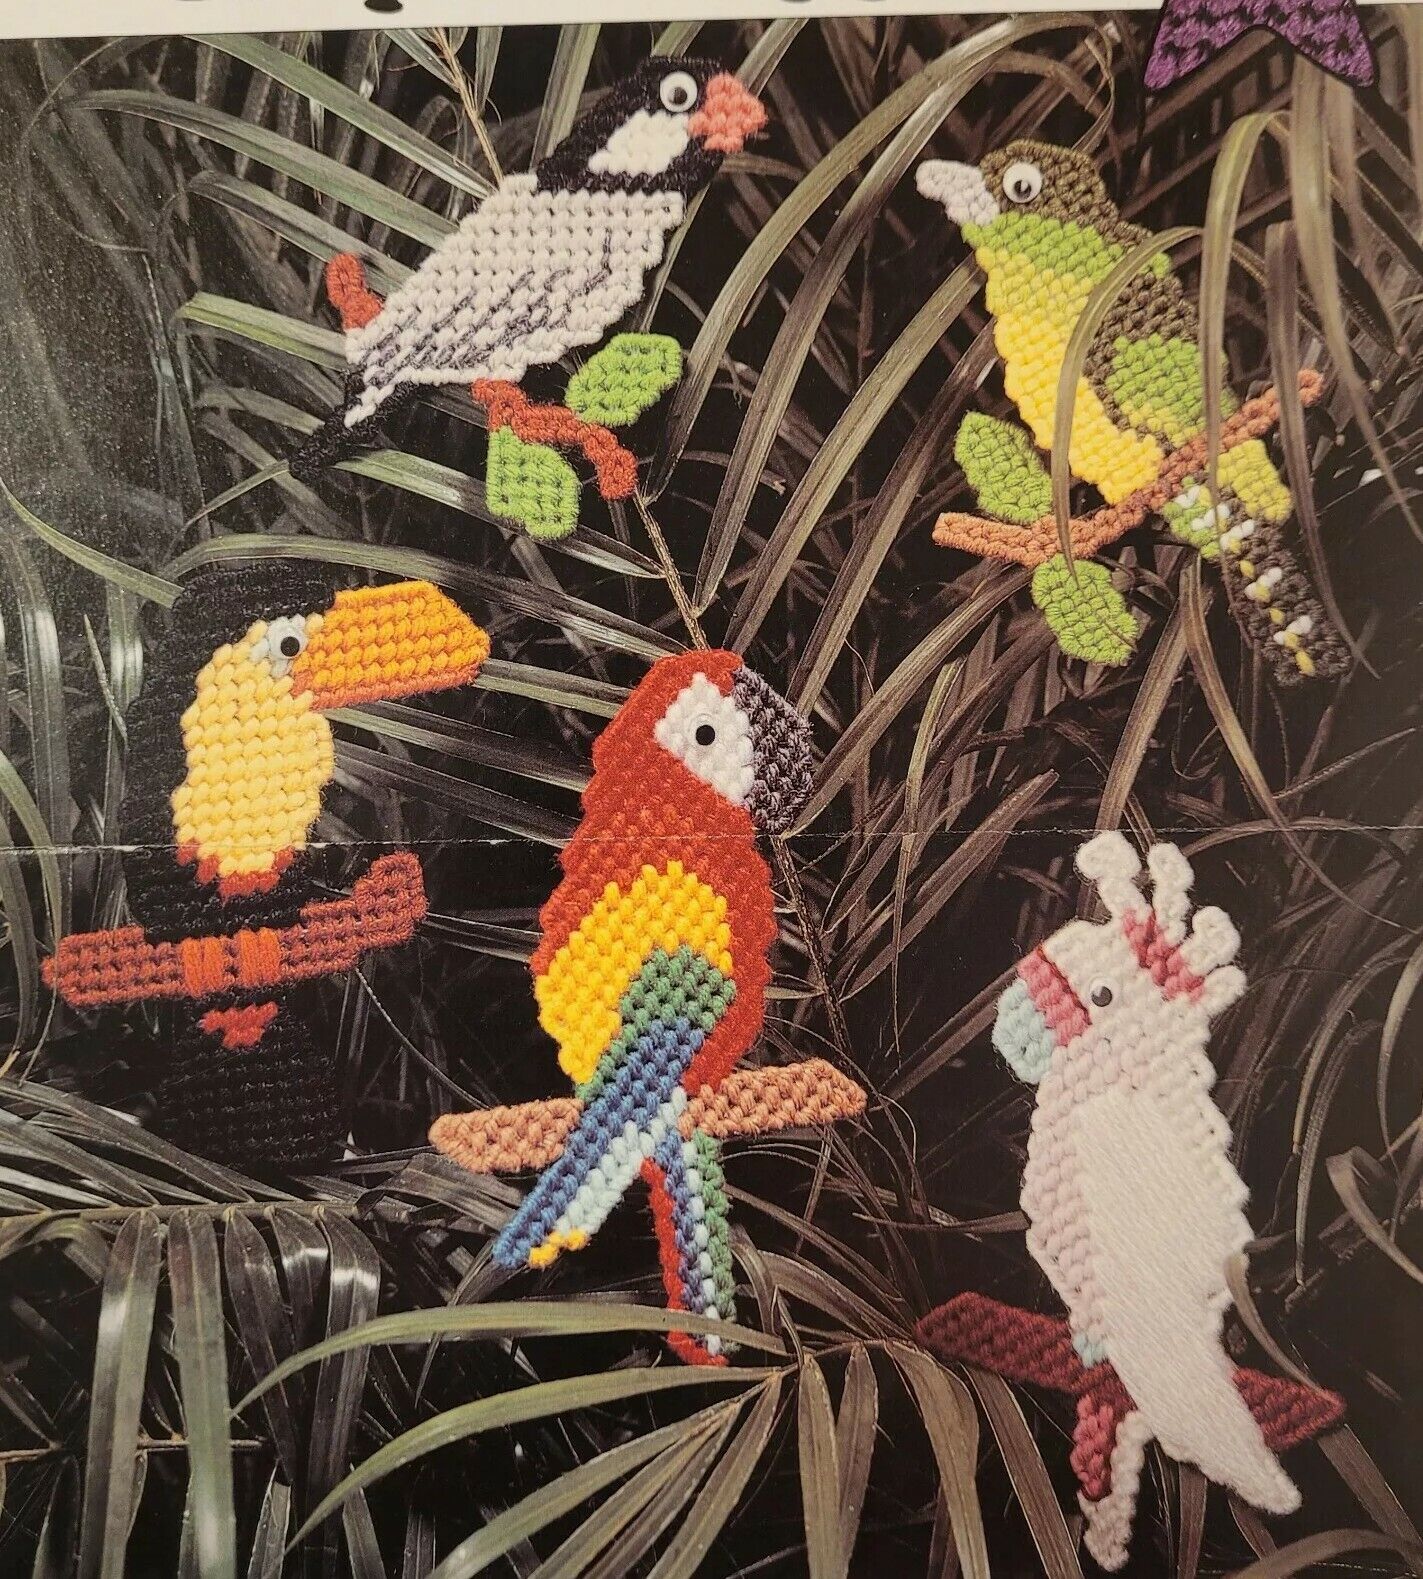 Tropical Very popular Birds Magnets on Plastic Canvas Virginia Sheet Pattern Ranking TOP1